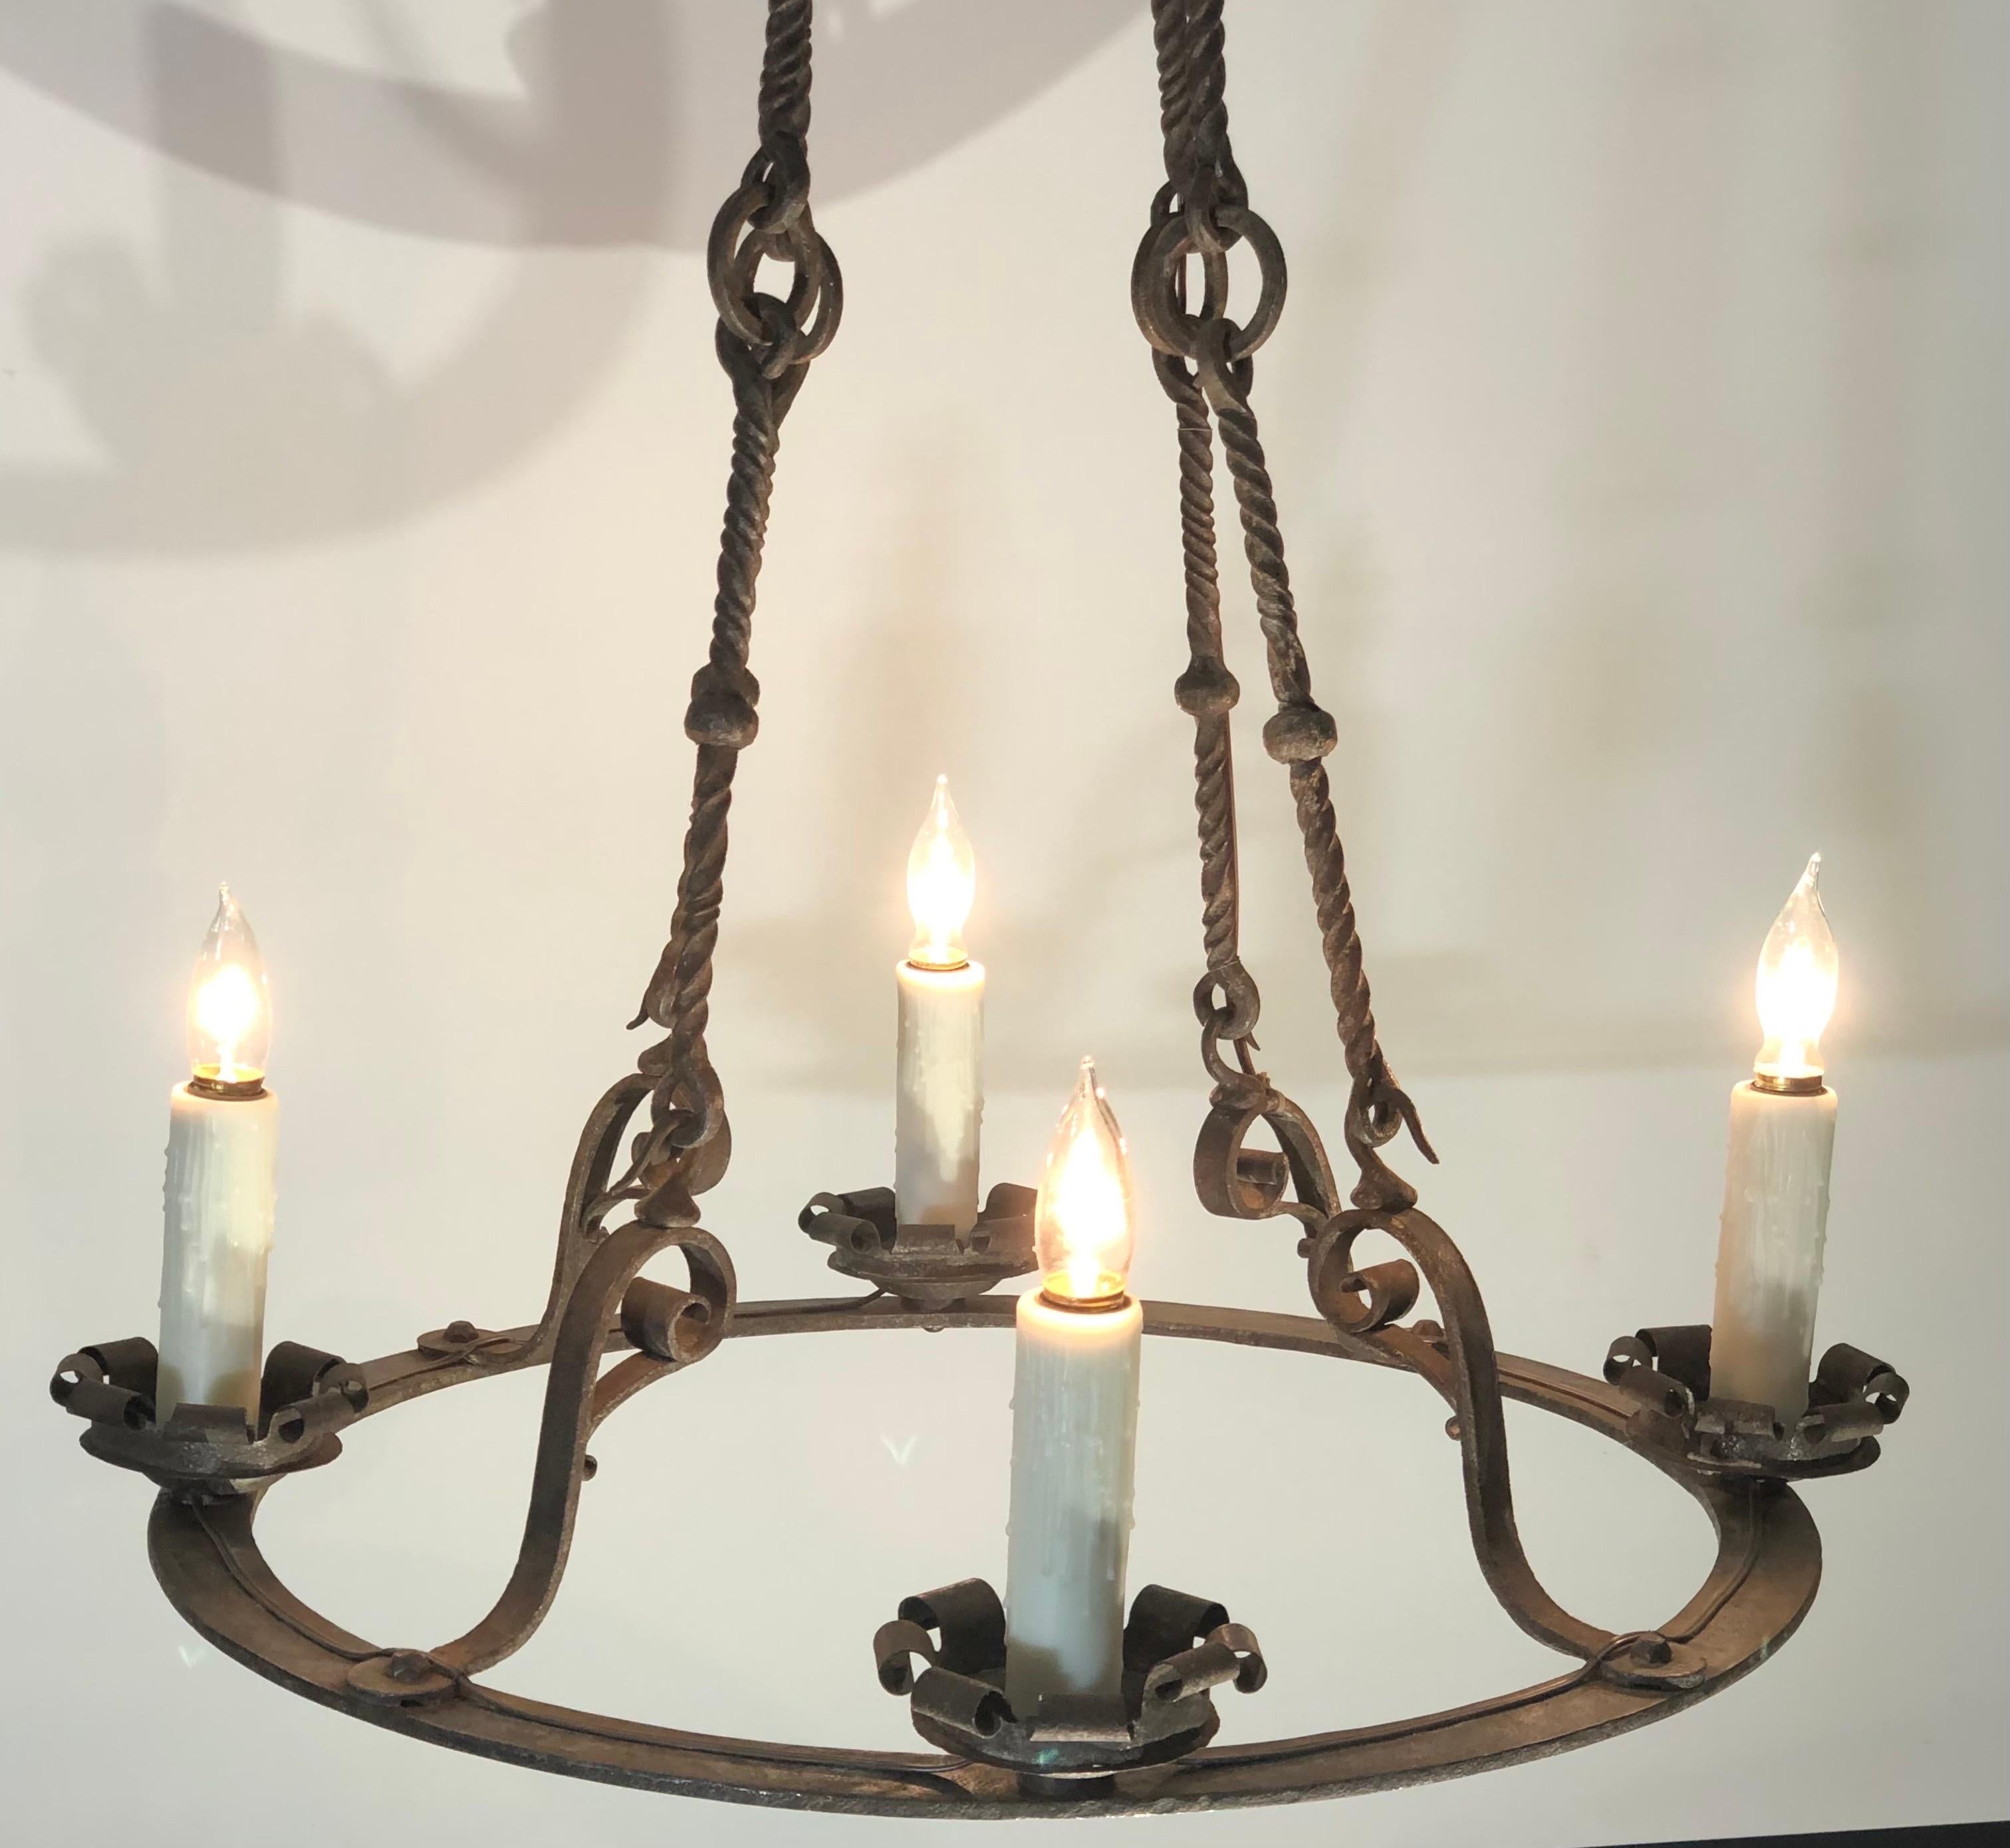 Gothic French Circular Hand-Wrought Iron Chandelier. 19th Century